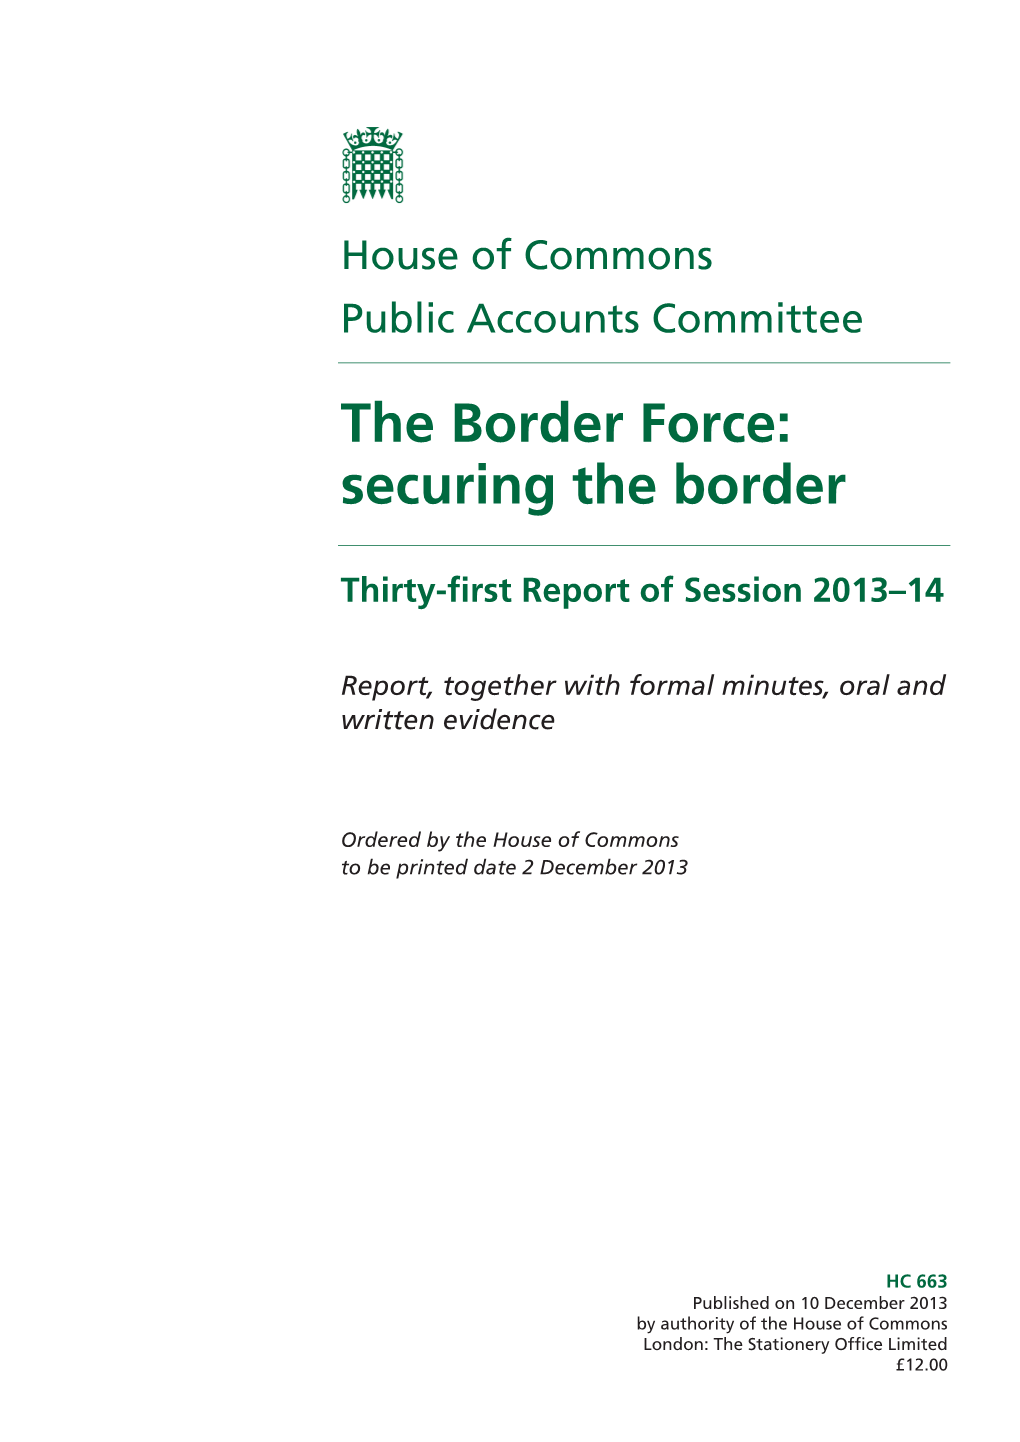 The Border Force: Securing the Border